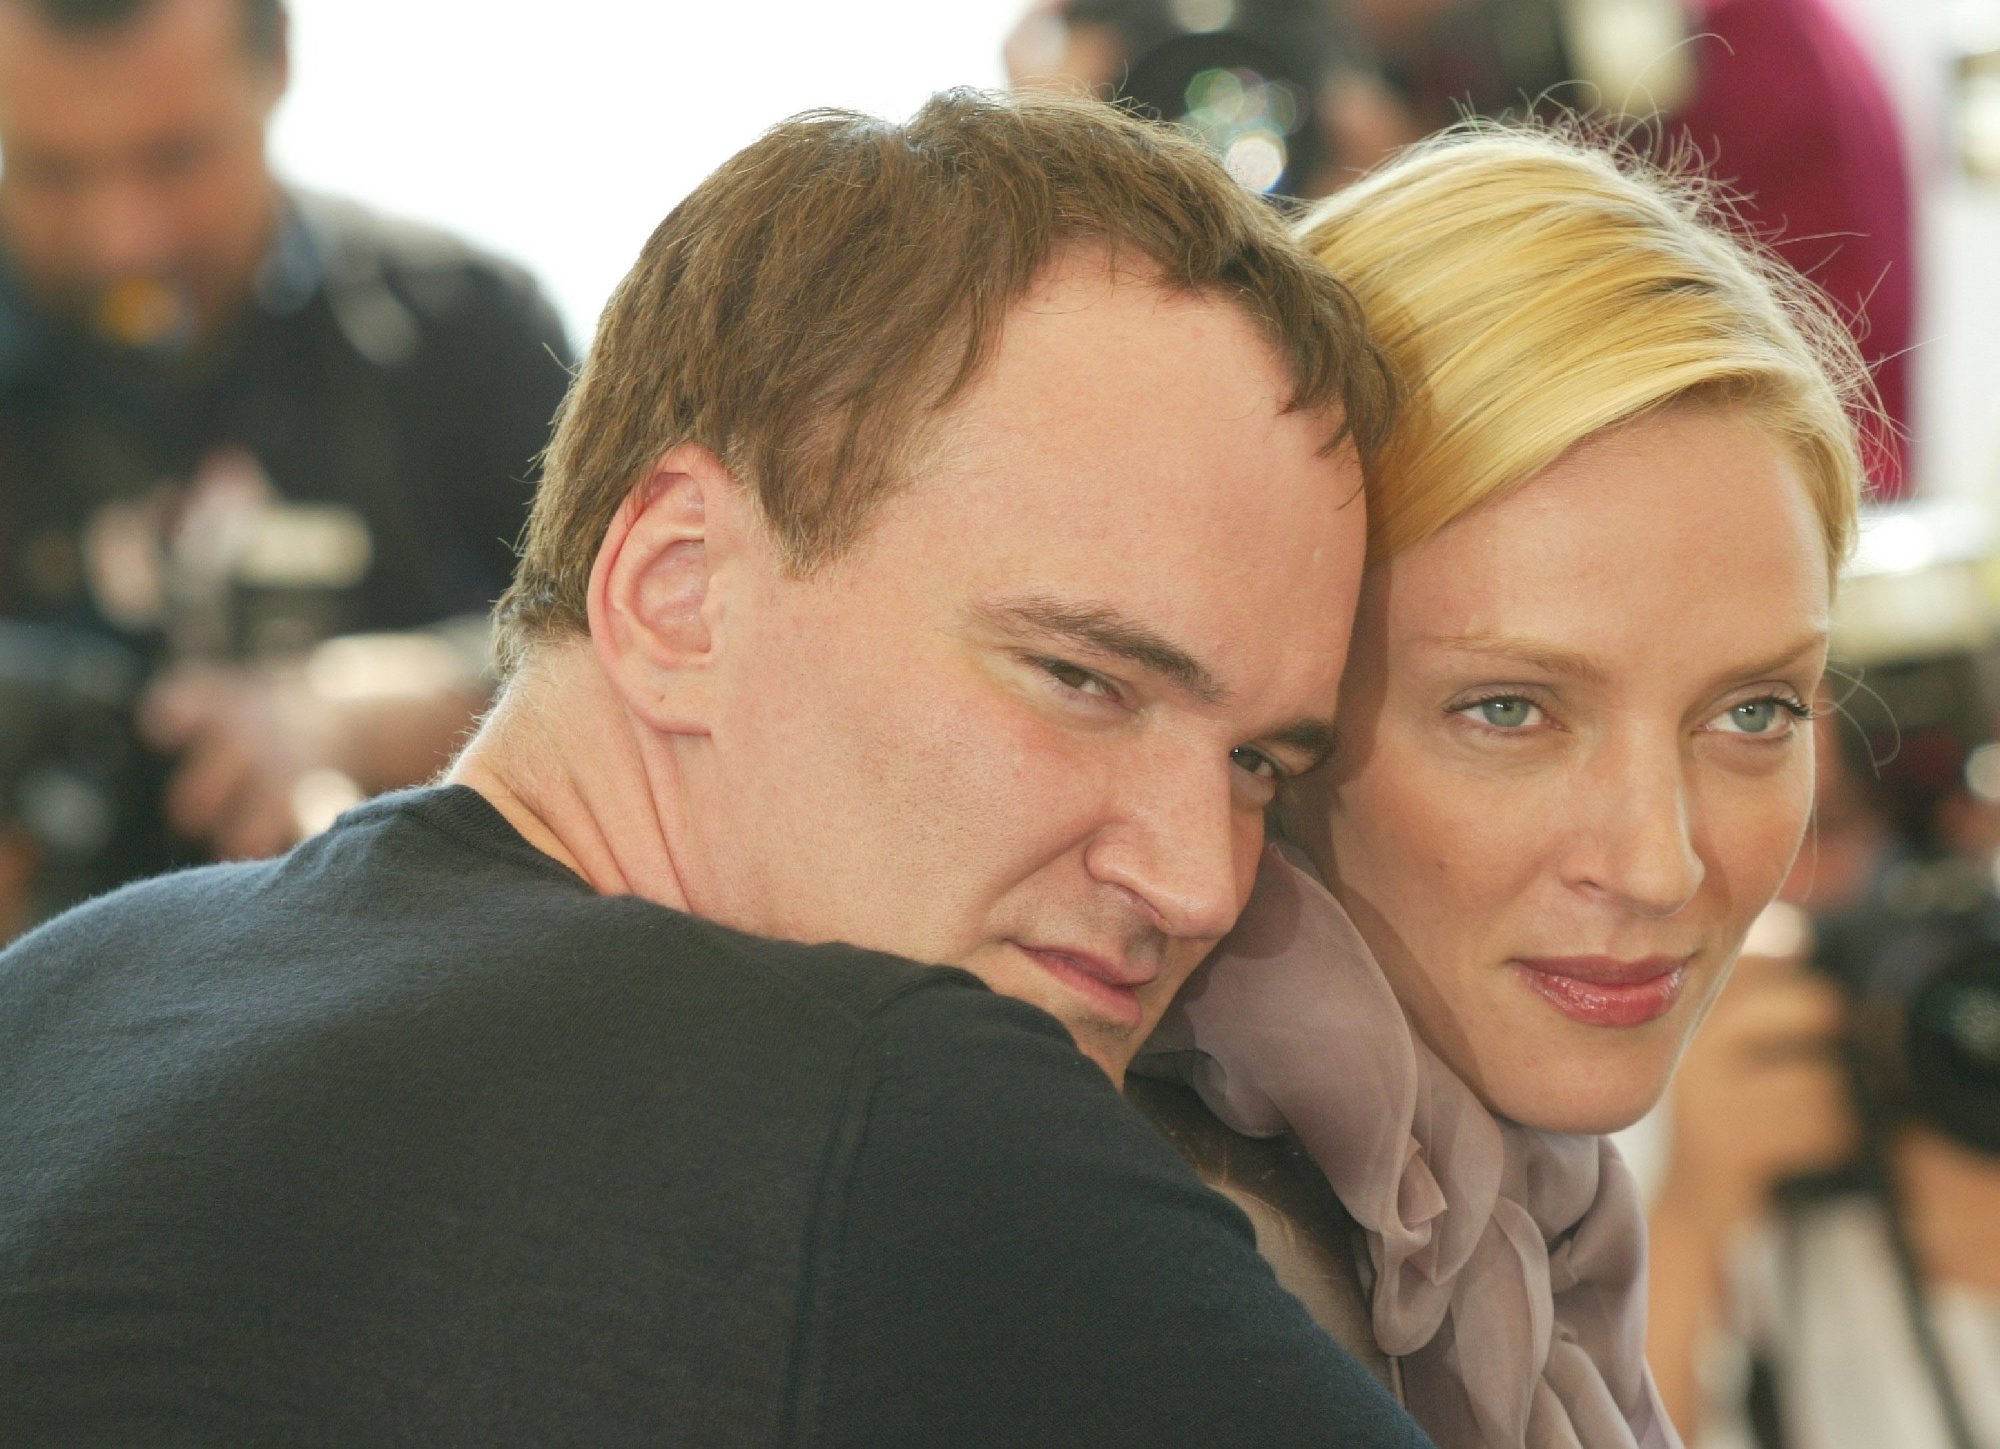 'Kill Bill' filmmaker Quentin Tarantino and actor Uma Thurman hugging each other with a slight smile on their faces